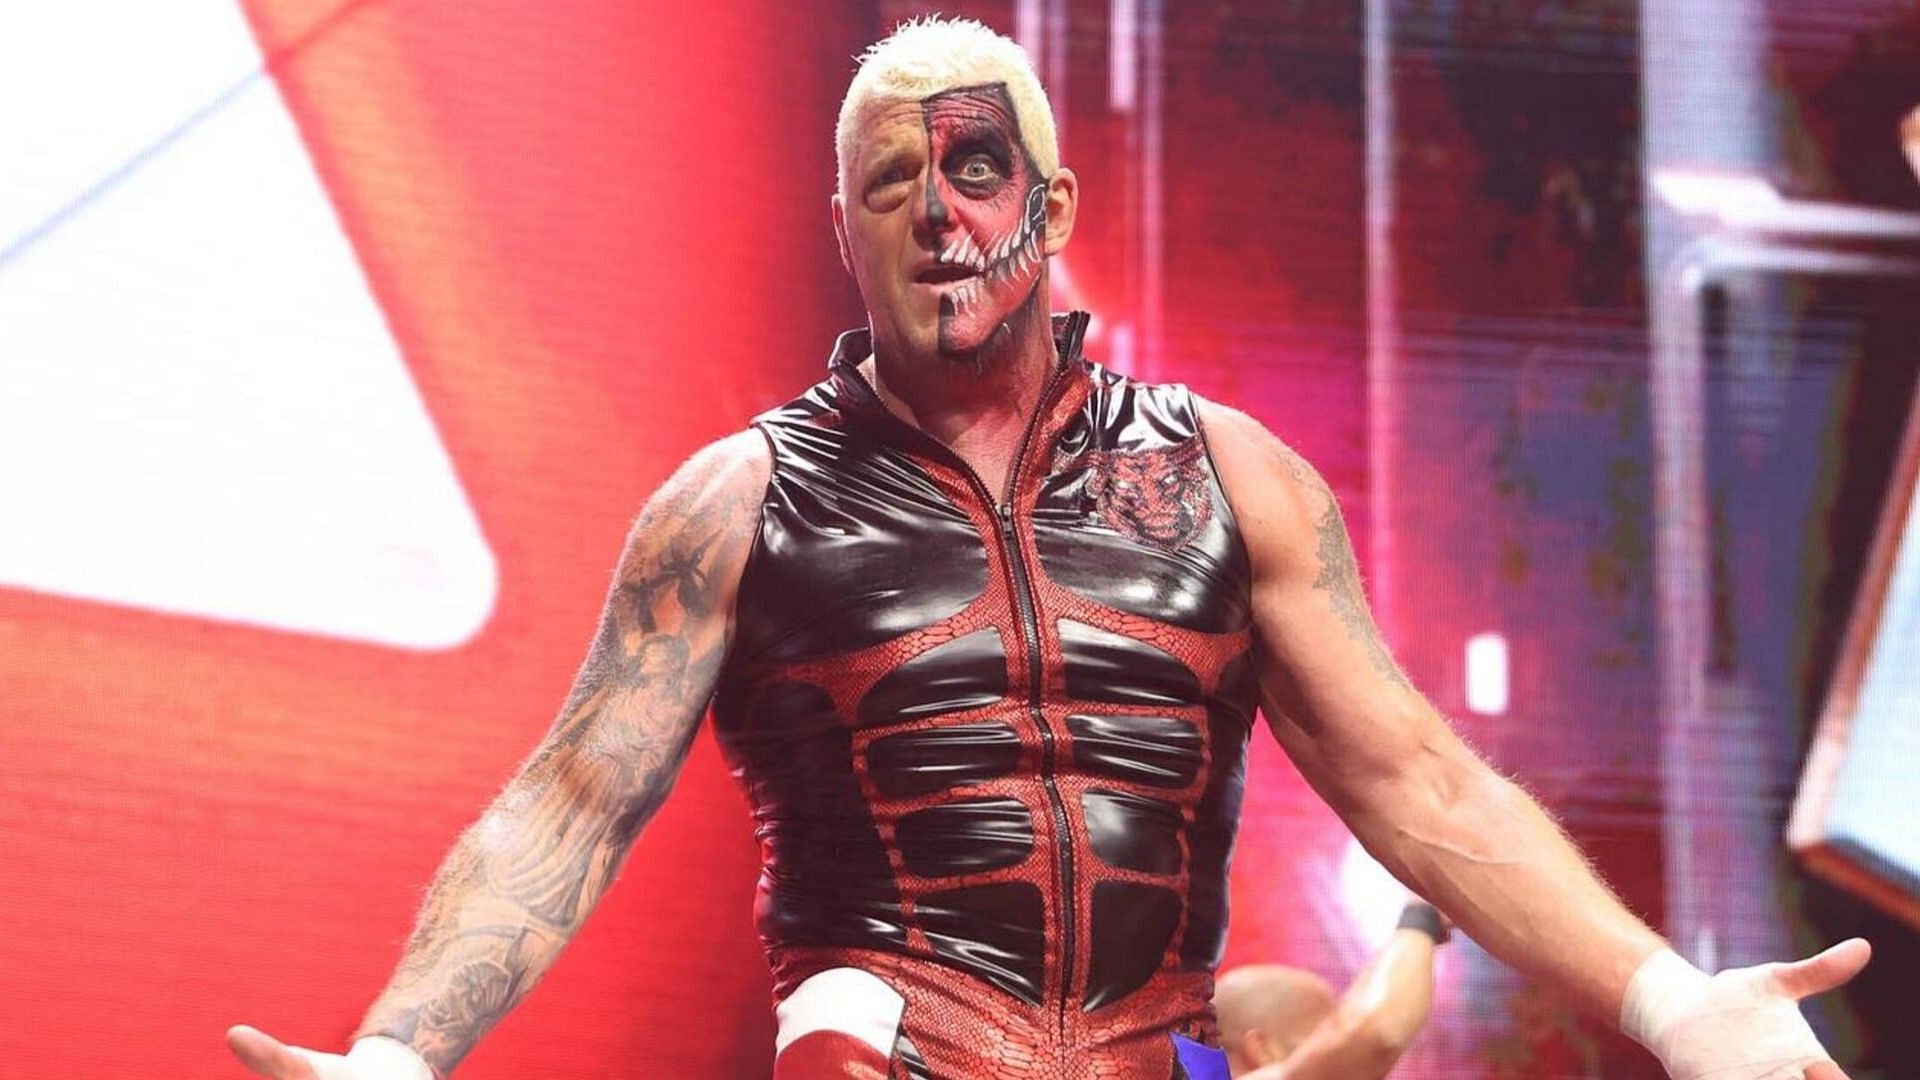 The legendary Dustin Rhodes makes his entrance on AEW Collision